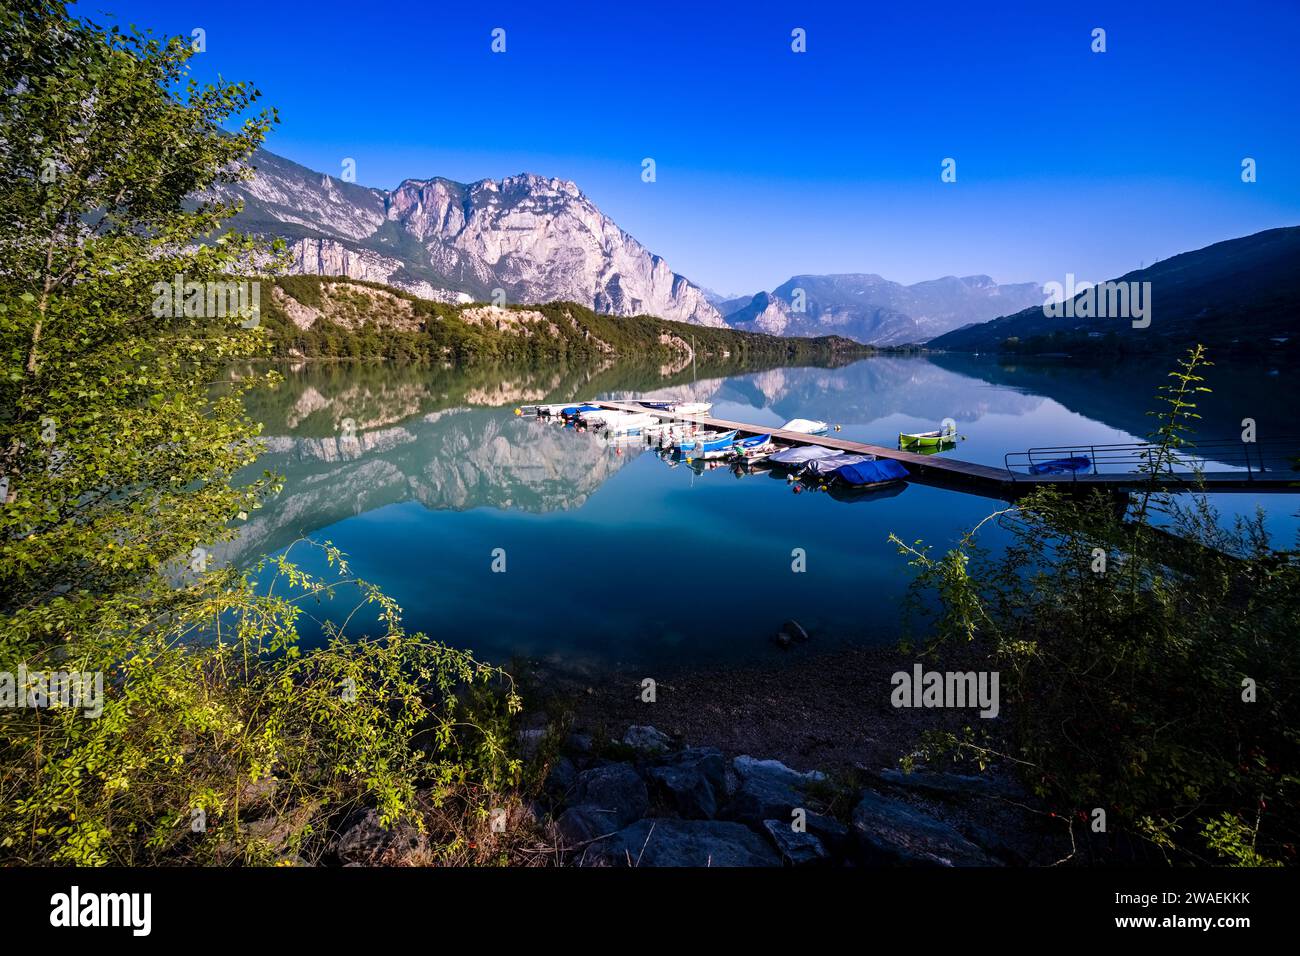 Summit and ridges of the mountain Monte Casale reflecting in the water of the lake Lago di Cavedine, rowing boats attached to a jetty. Stock Photo